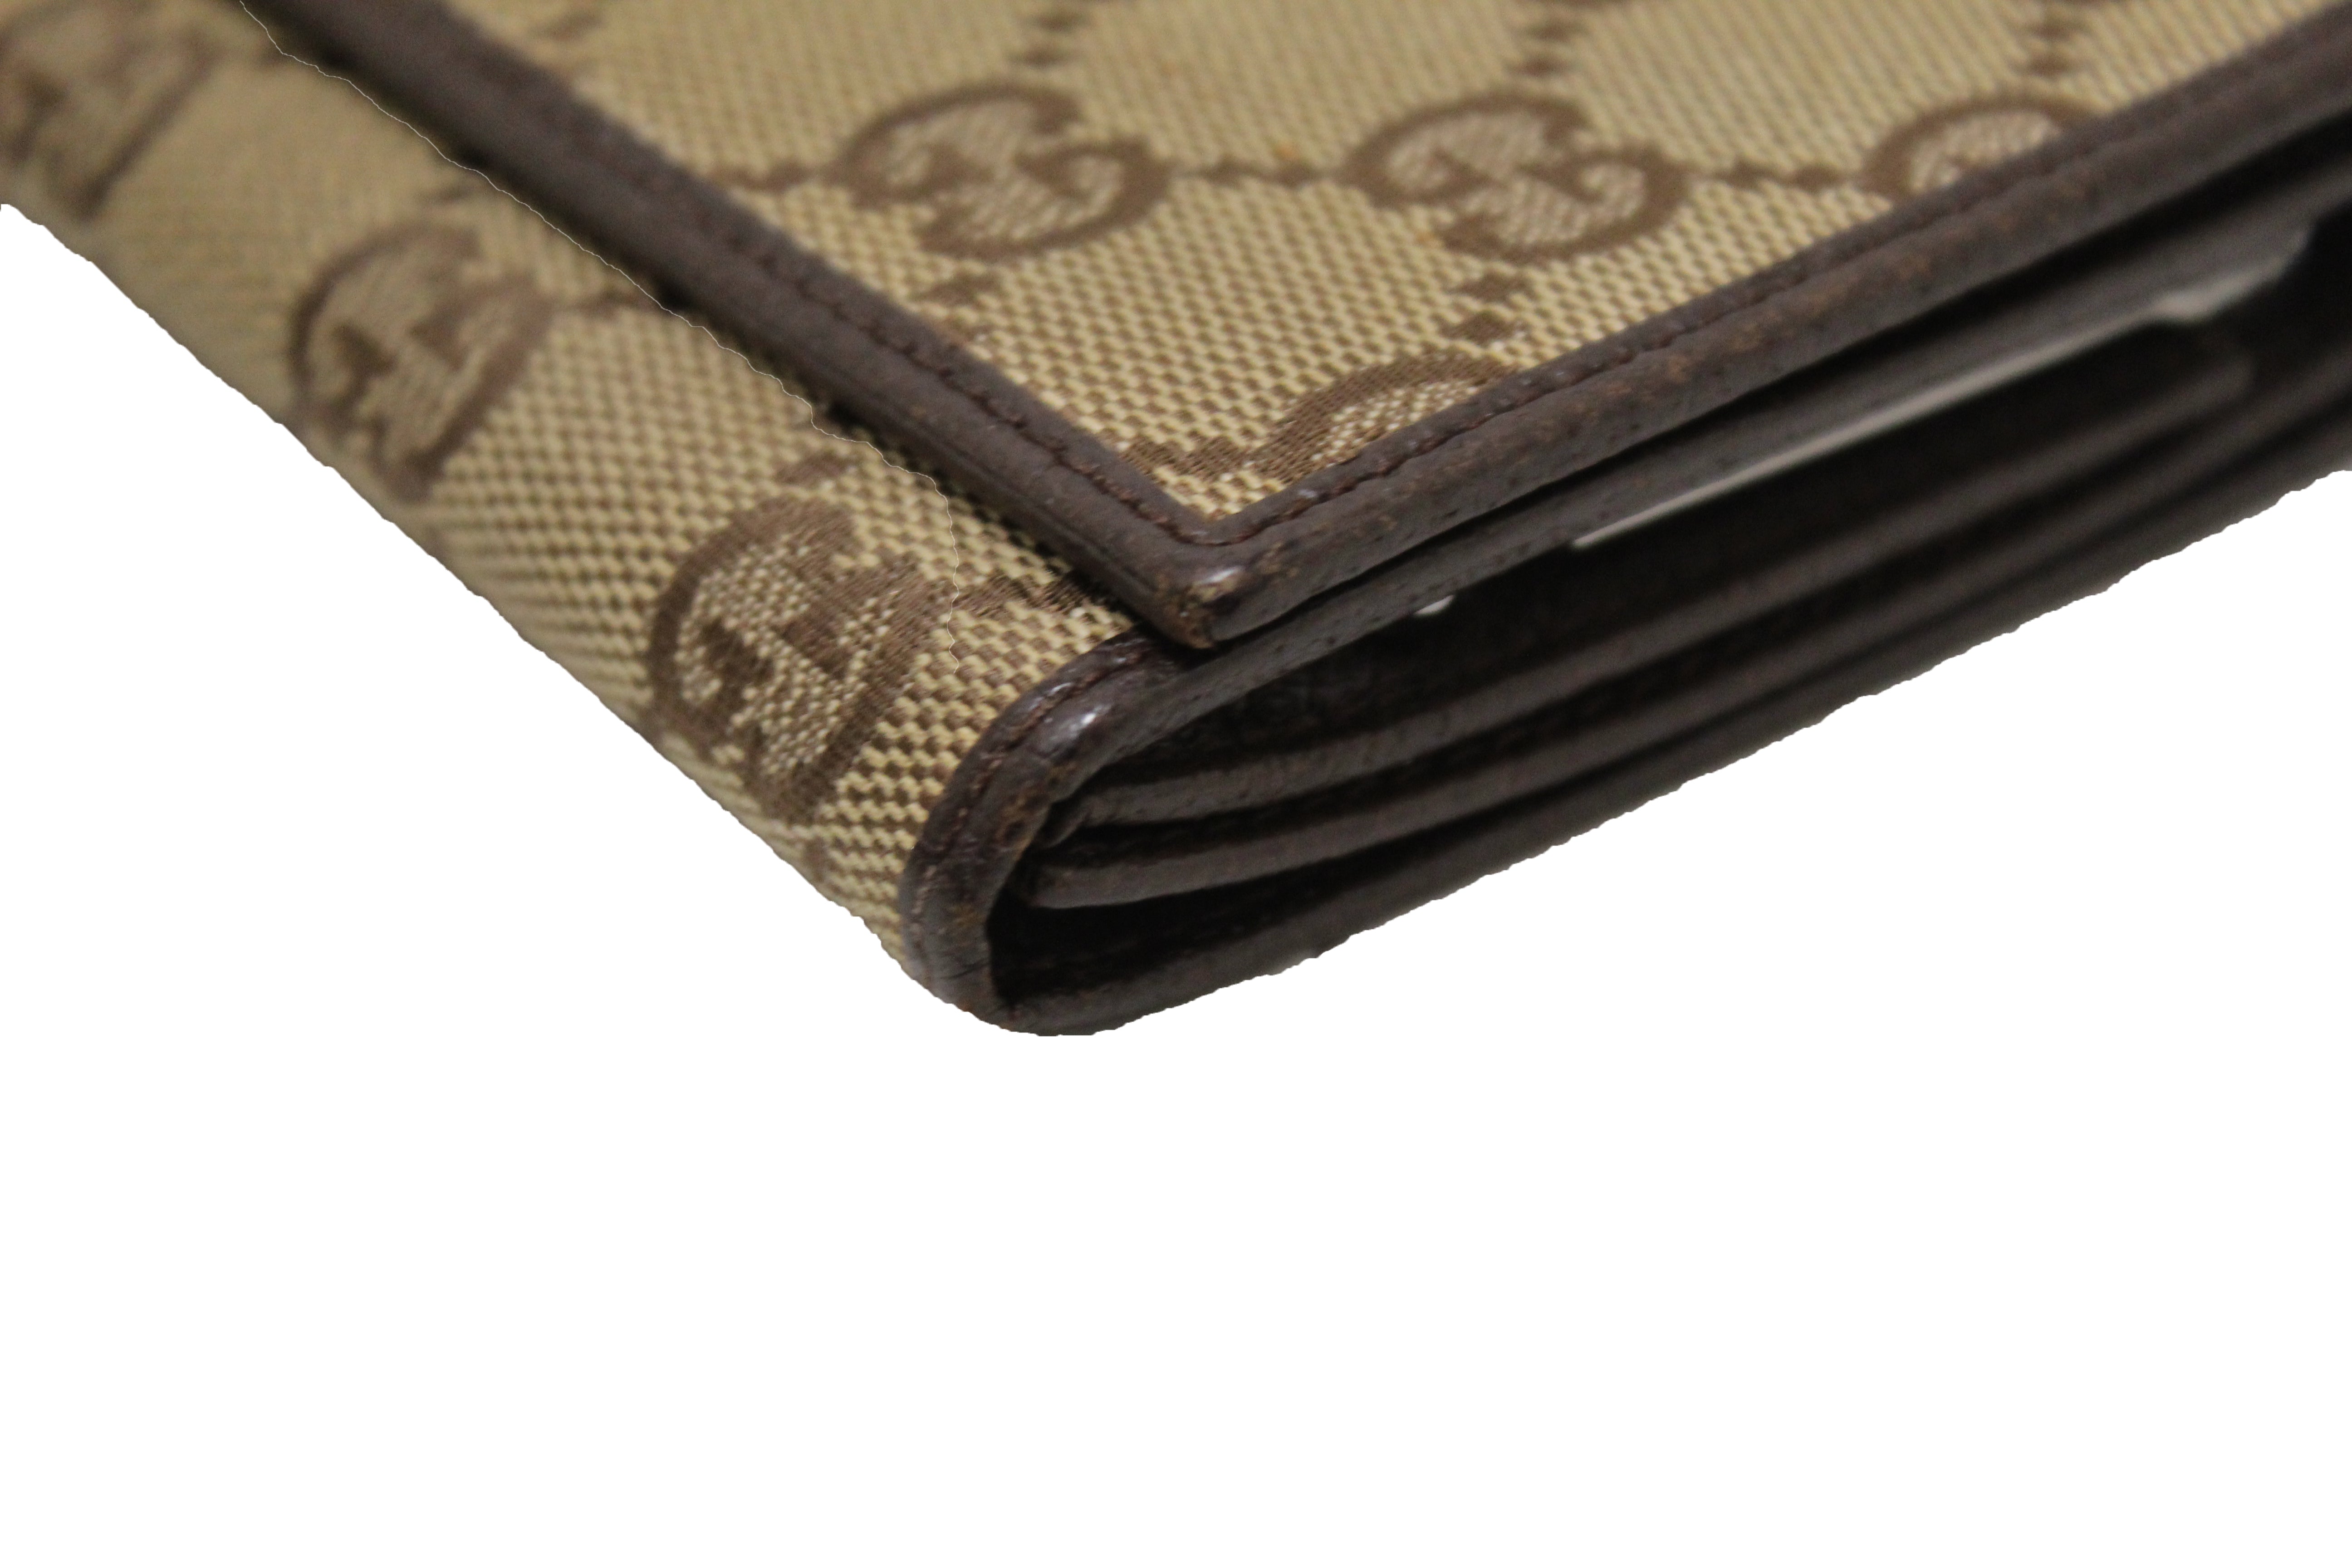 Gucci Beige & Purple Fabric & Leather Wallet